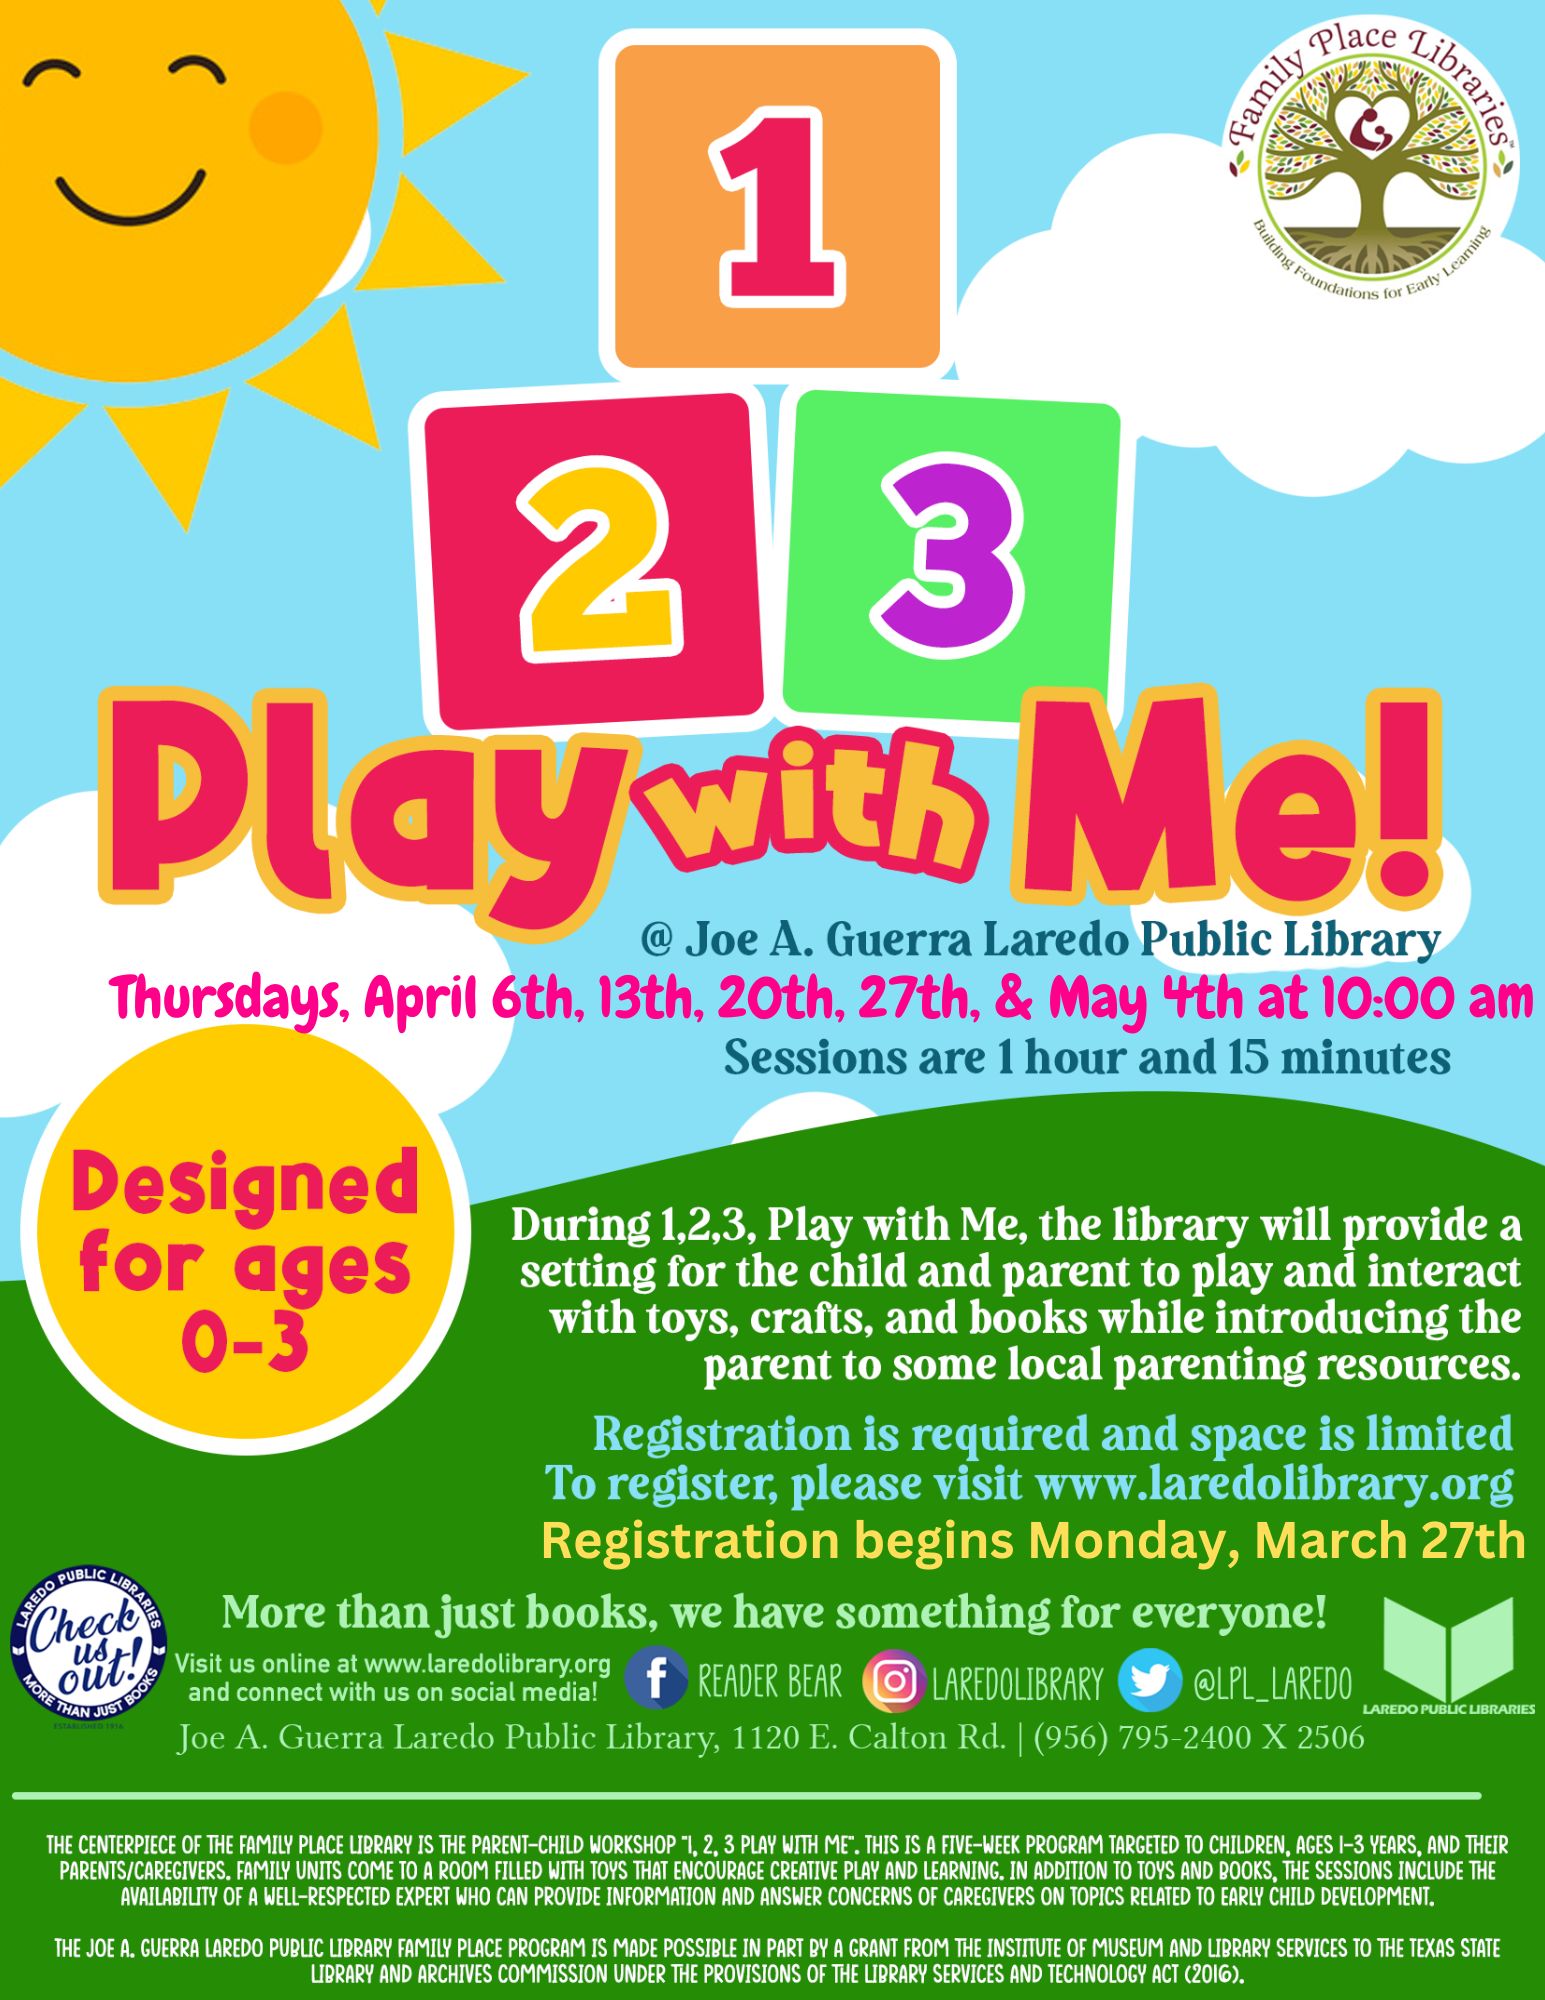 1, 2, 3 Play with Me!  Laredo Public Library